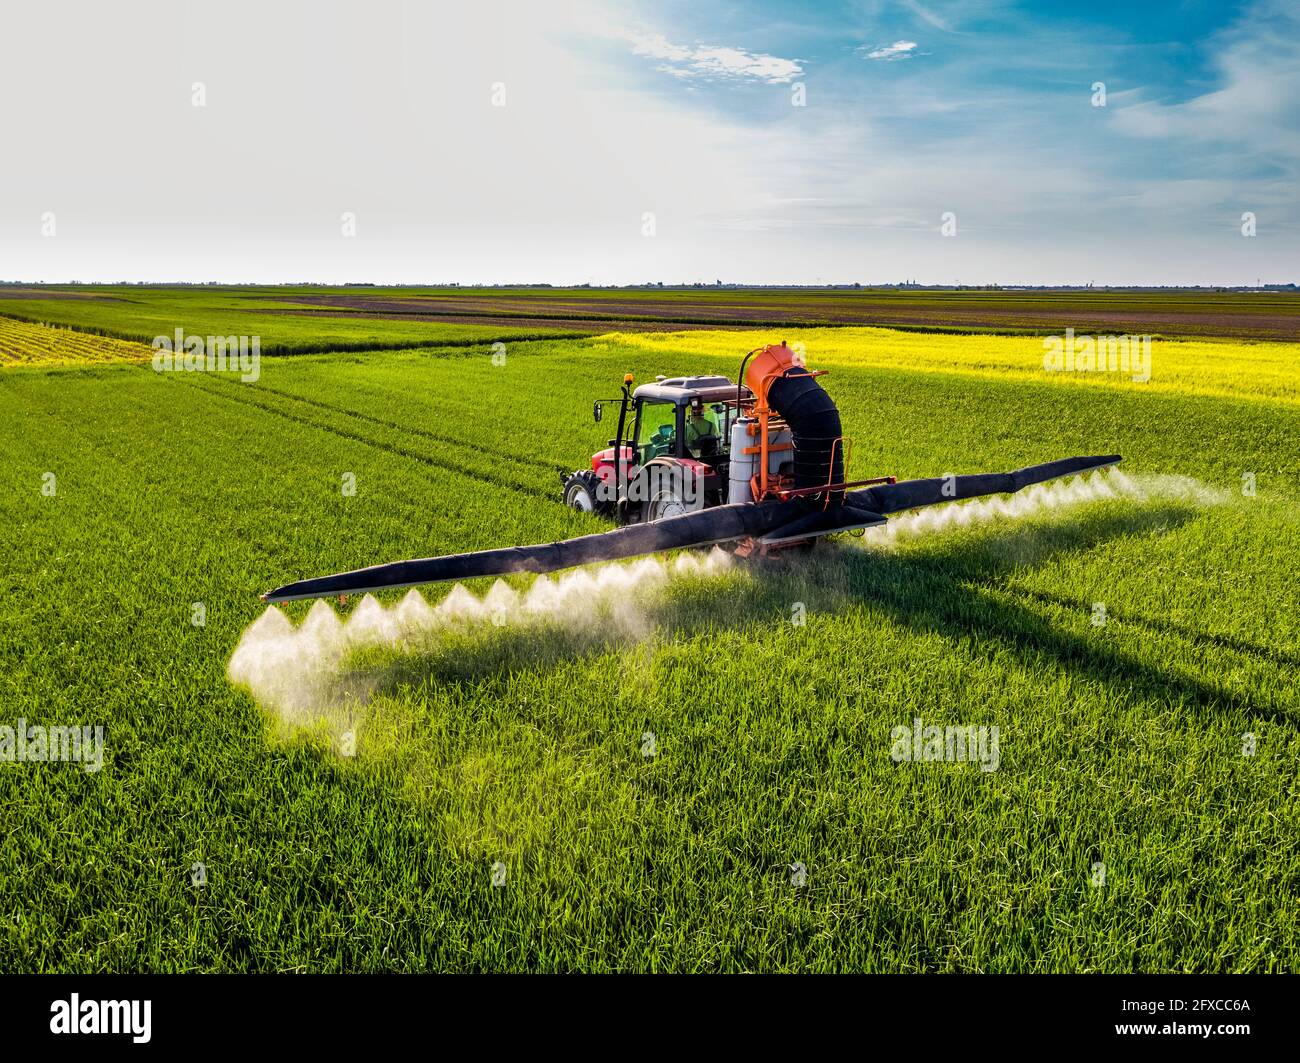 Tractor spraying pesticide on wheat field during sunny day Stock Photo